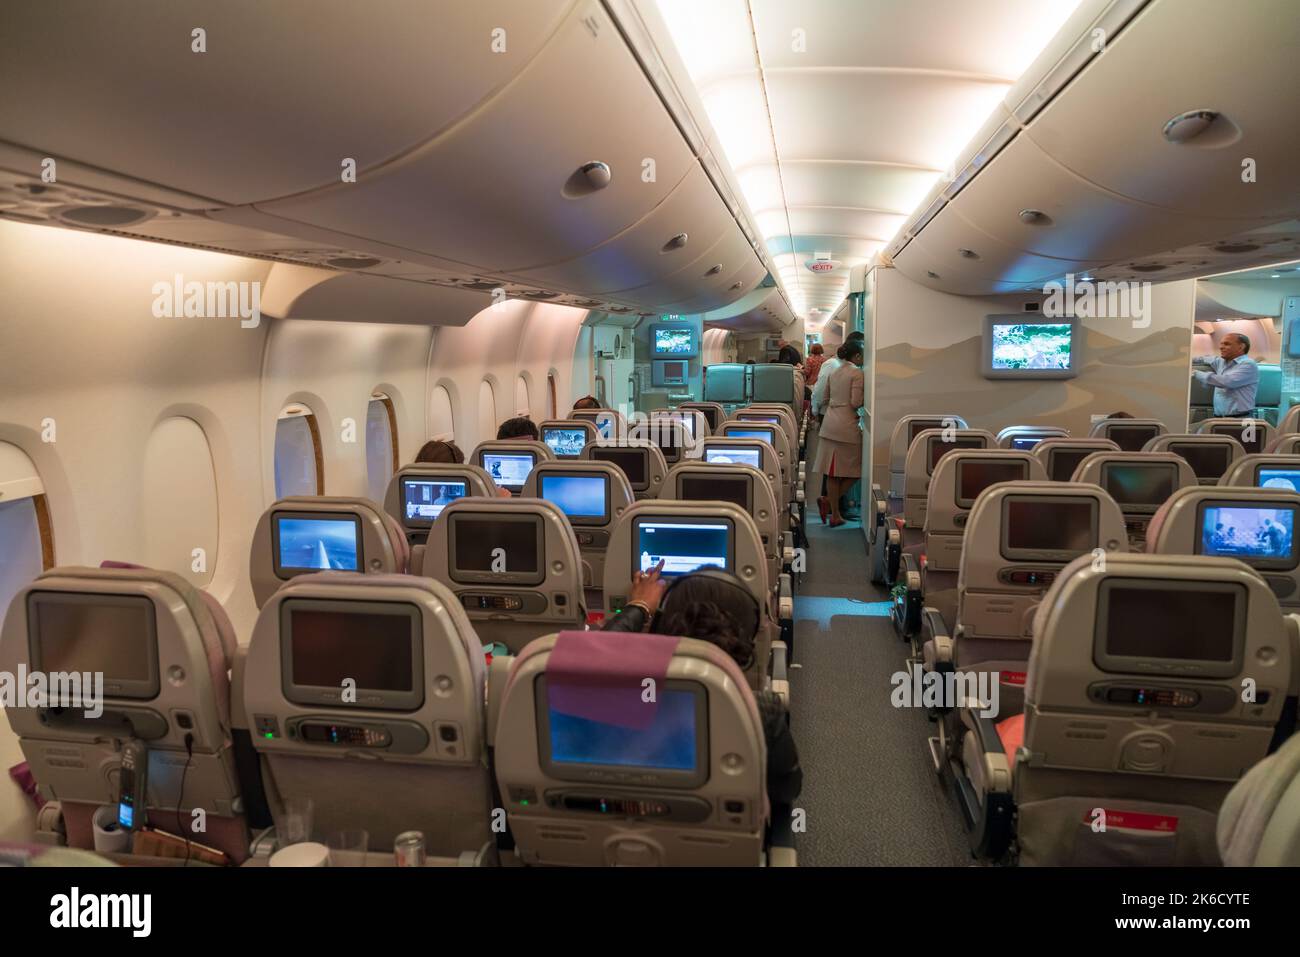 Interior, inside the economy class cabin on a plane Stock Photo